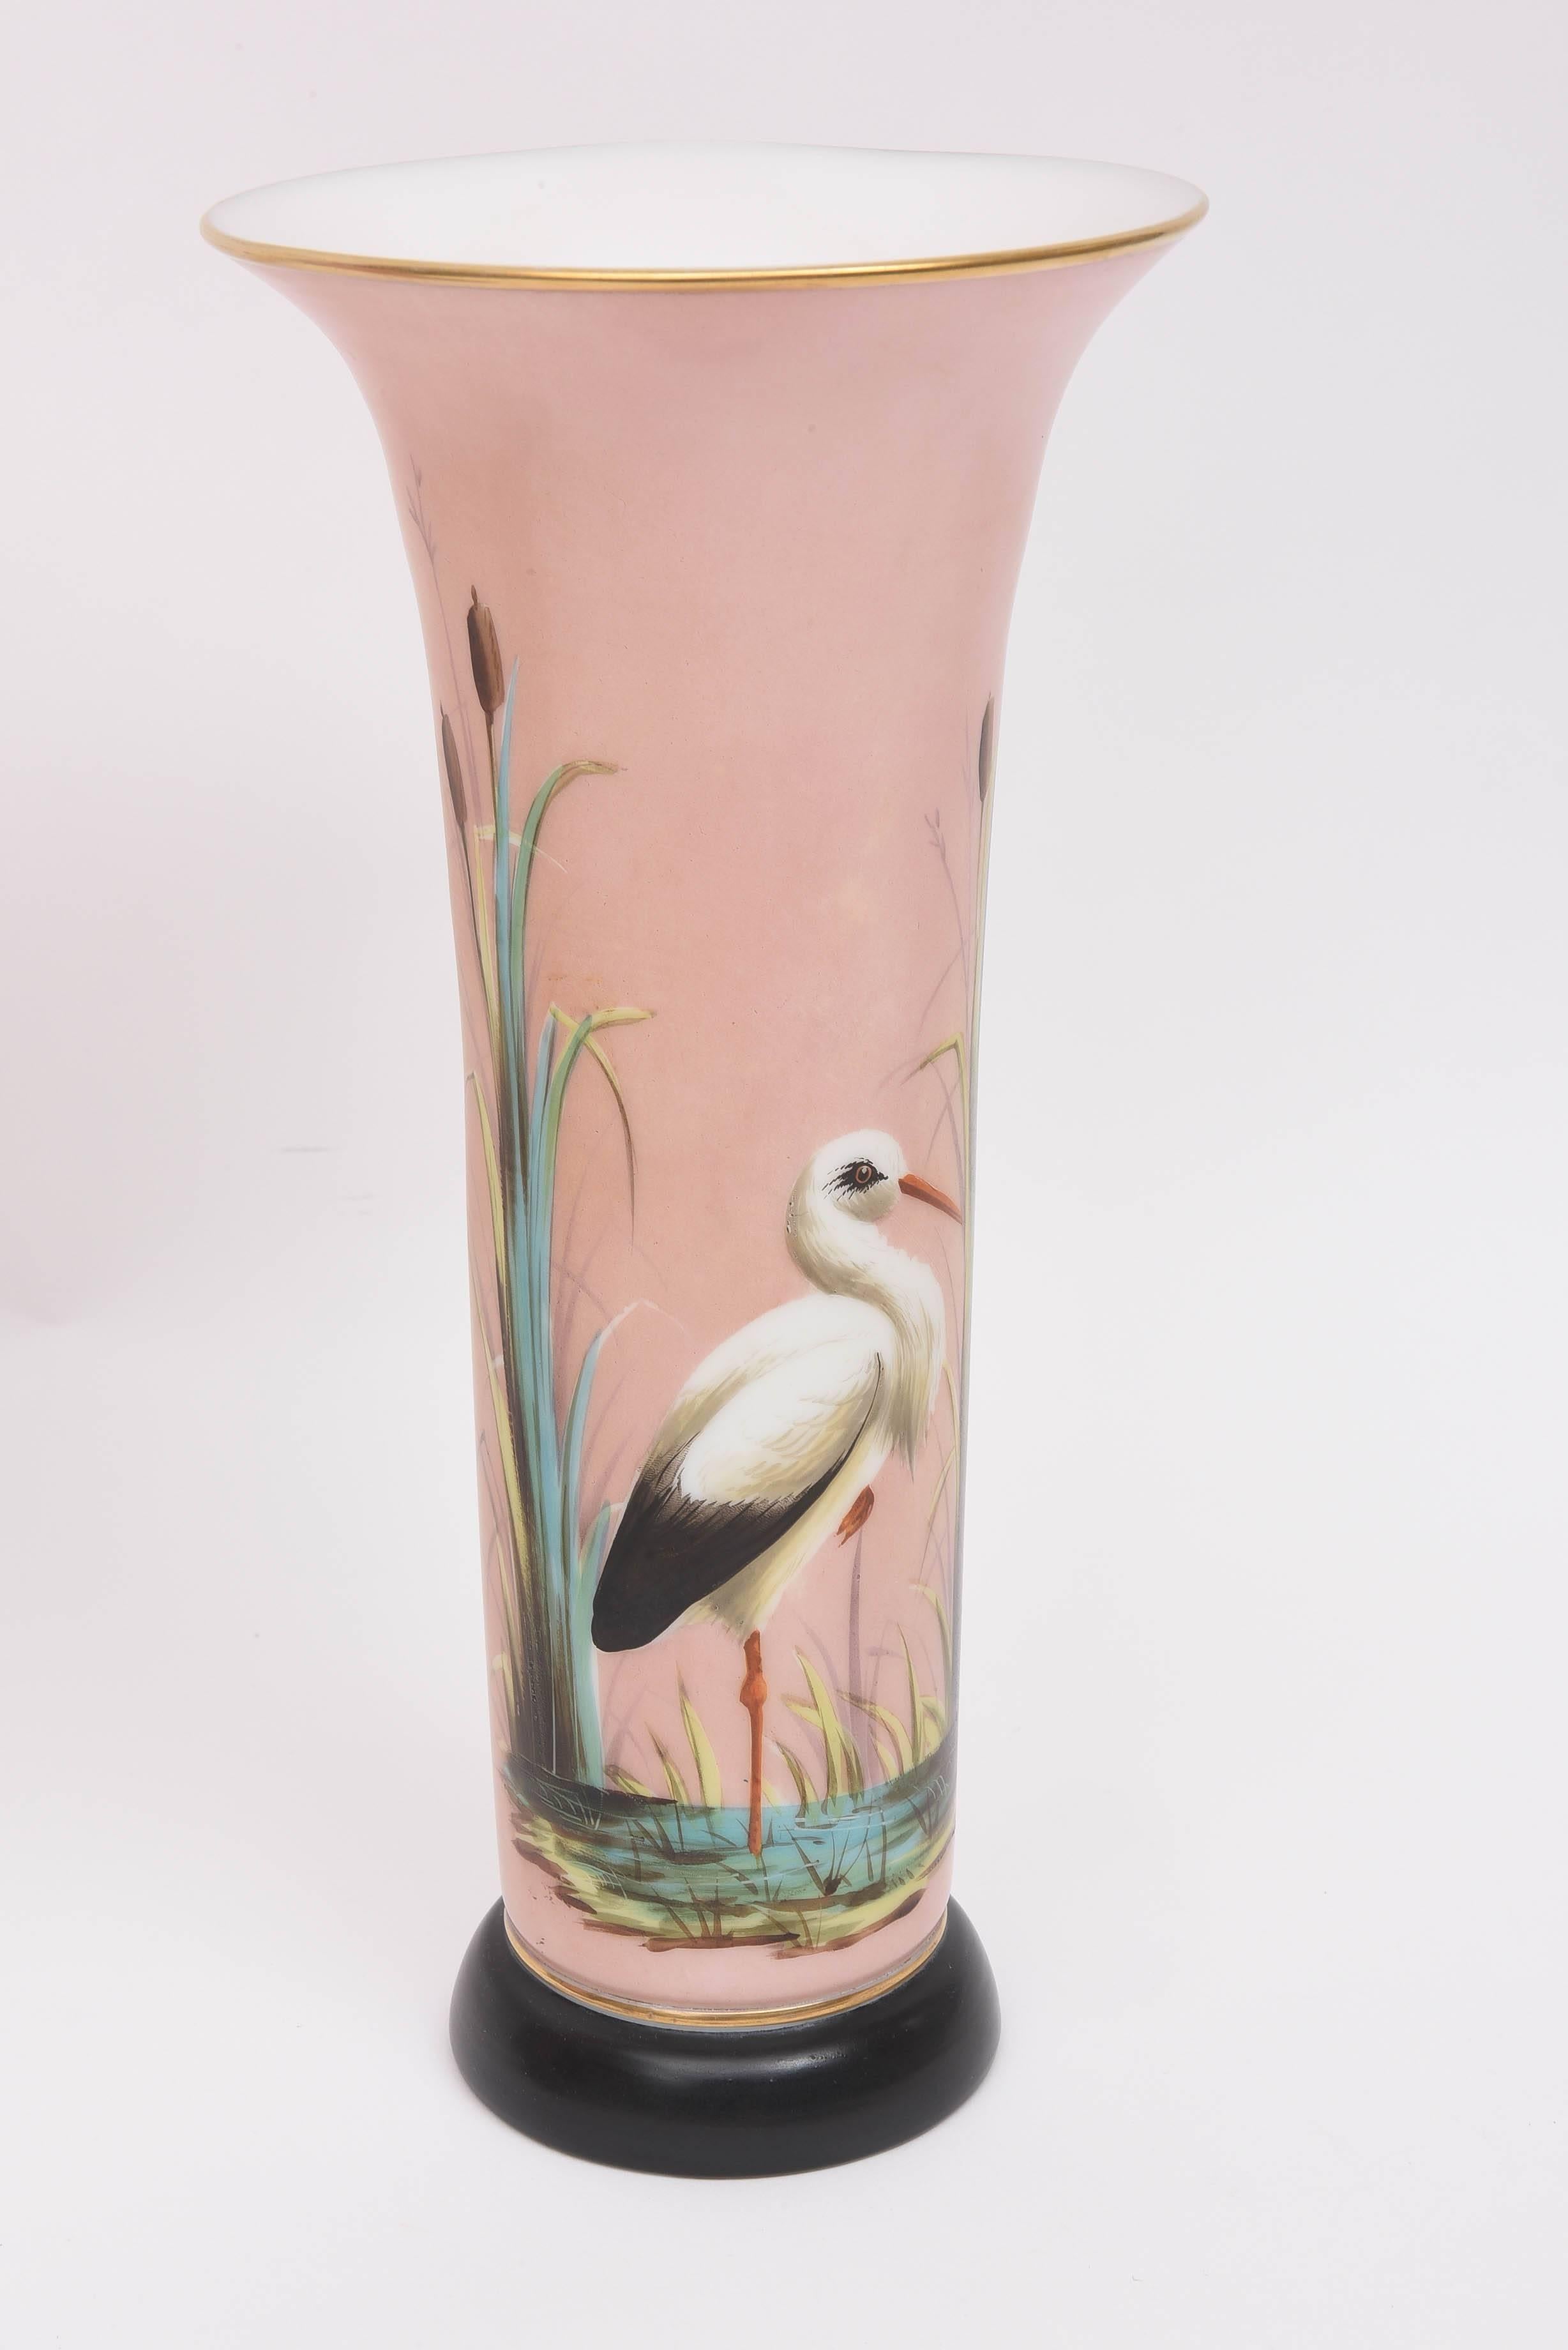 A hard to find pair of antique opaline glass vases, attributed to the storied  Baccarat factory of France. A wonderful pedestal base with vibrant hand painted exotic birds in full flora fauna. All designed on a soft pink ground. Nice white interior.